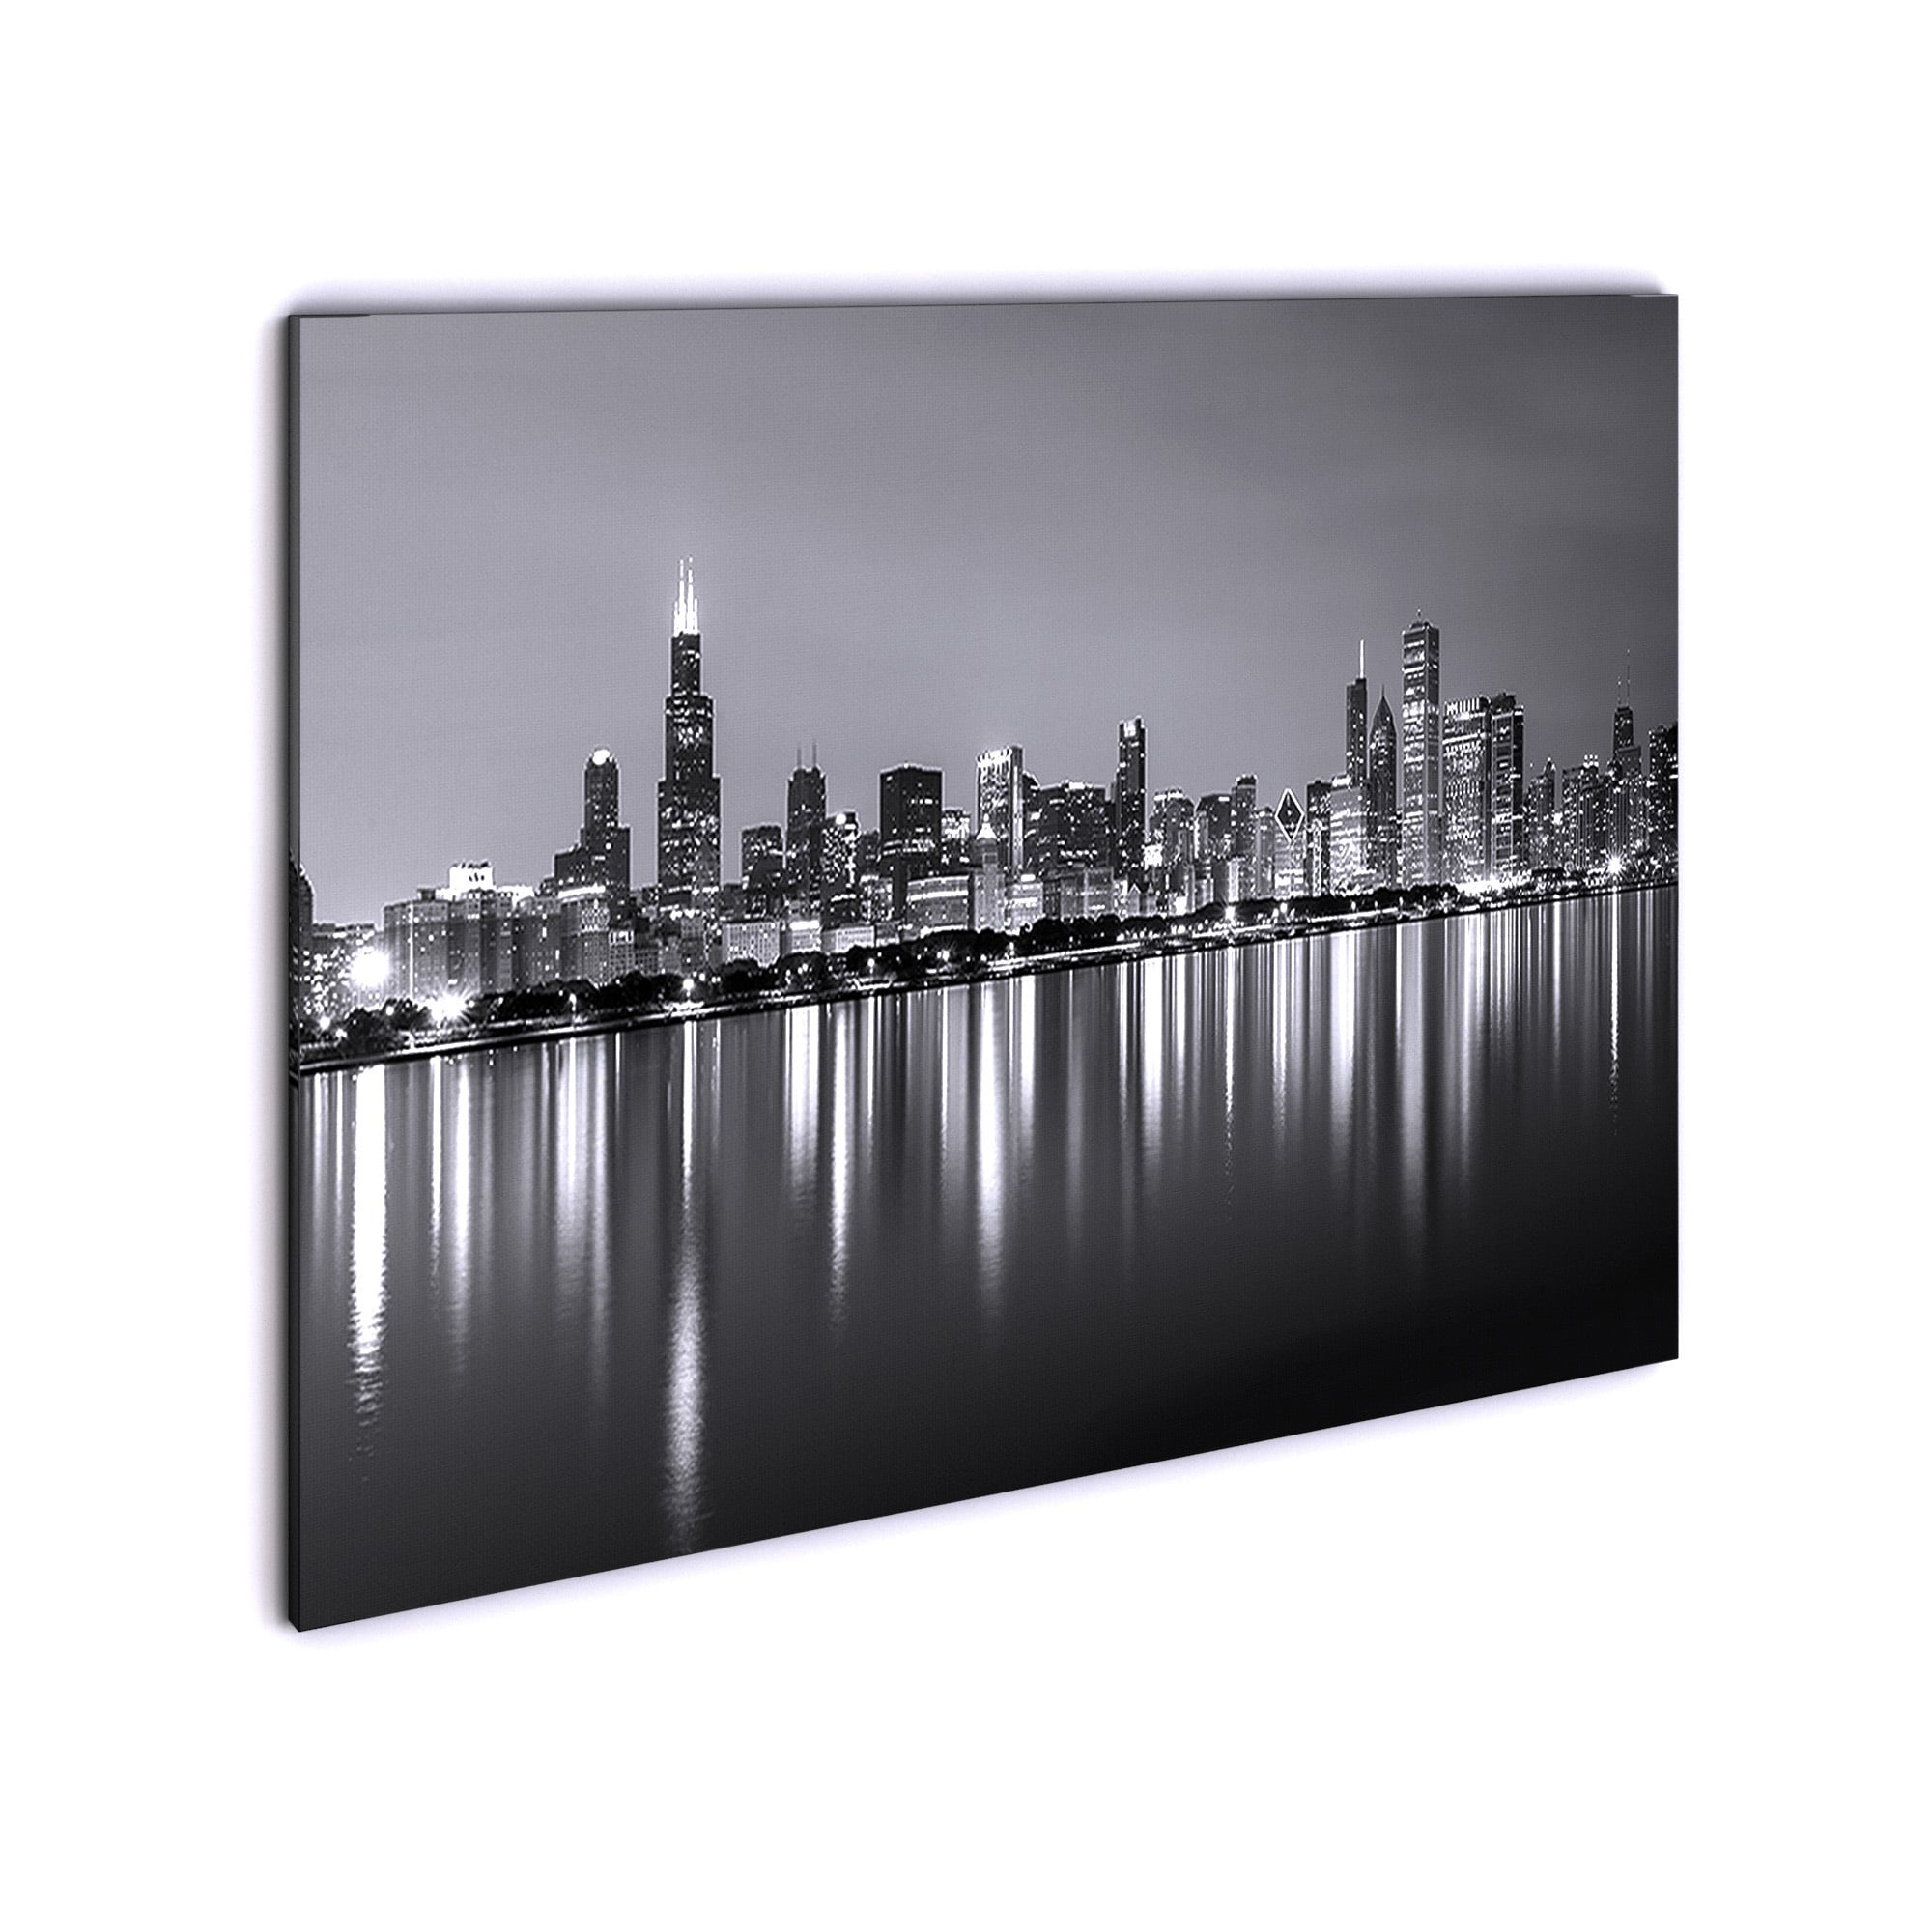 Carbon Loft Chicago Skyline At Night Black And White Cityscape Canvas Print On Sale Overstock